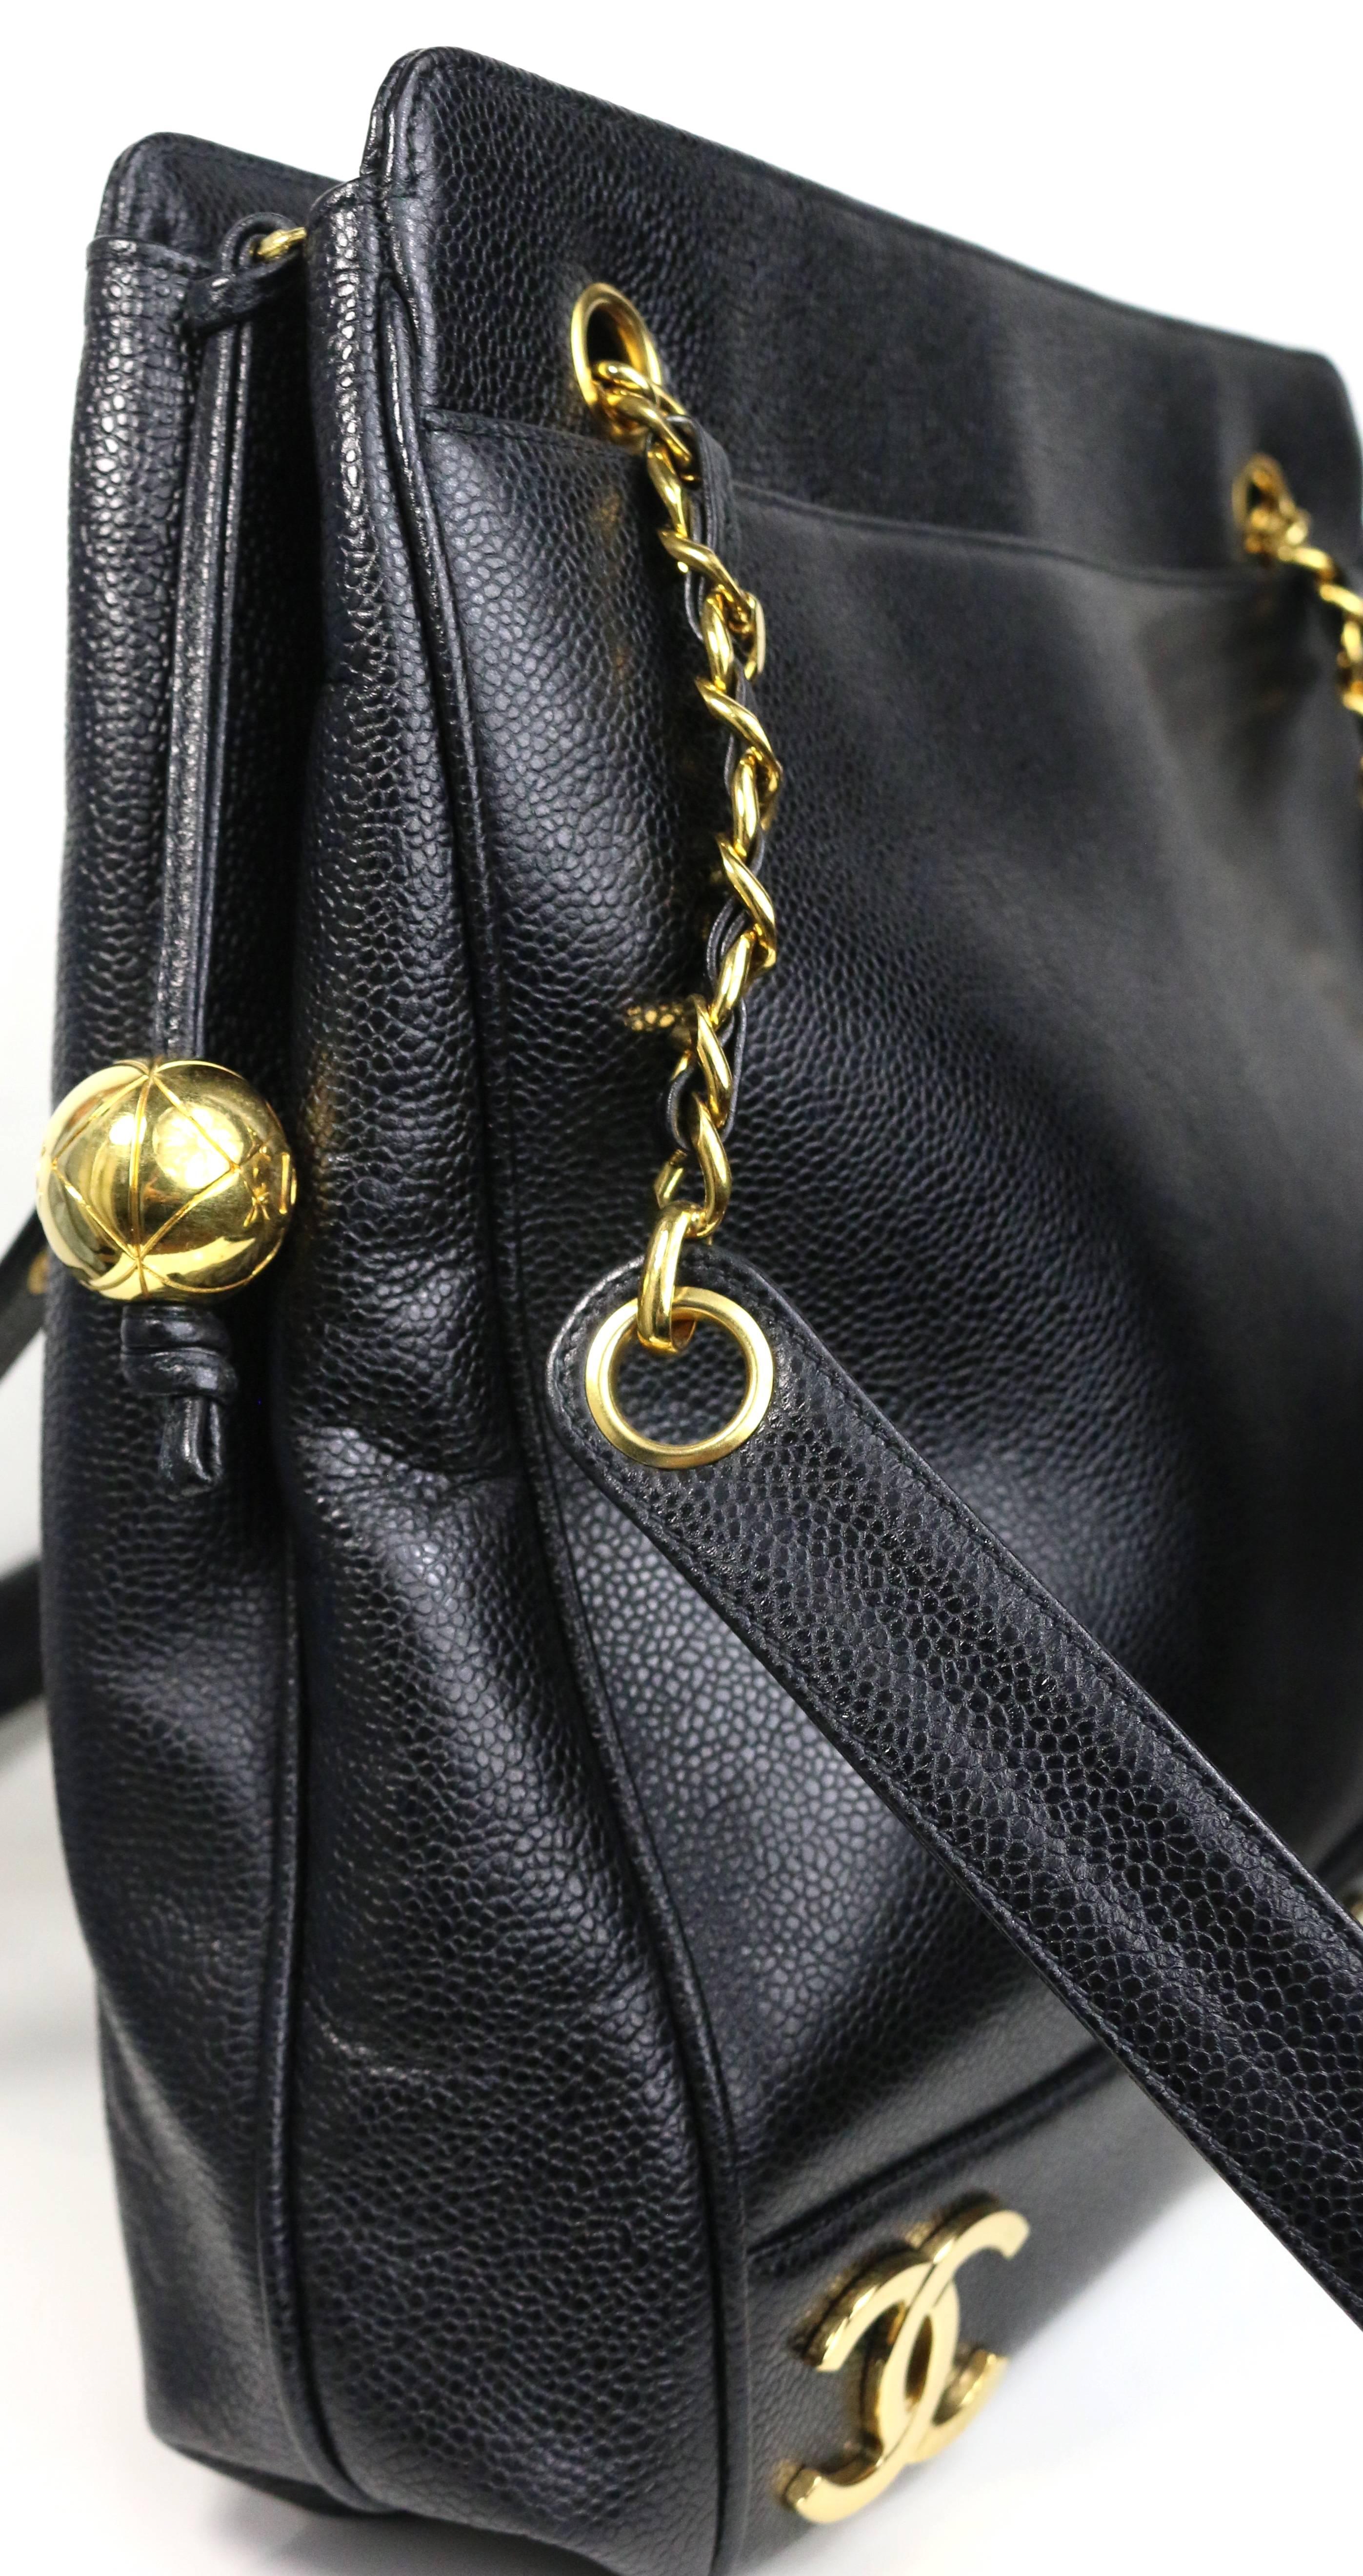 black chanel caviar bag with gold chain